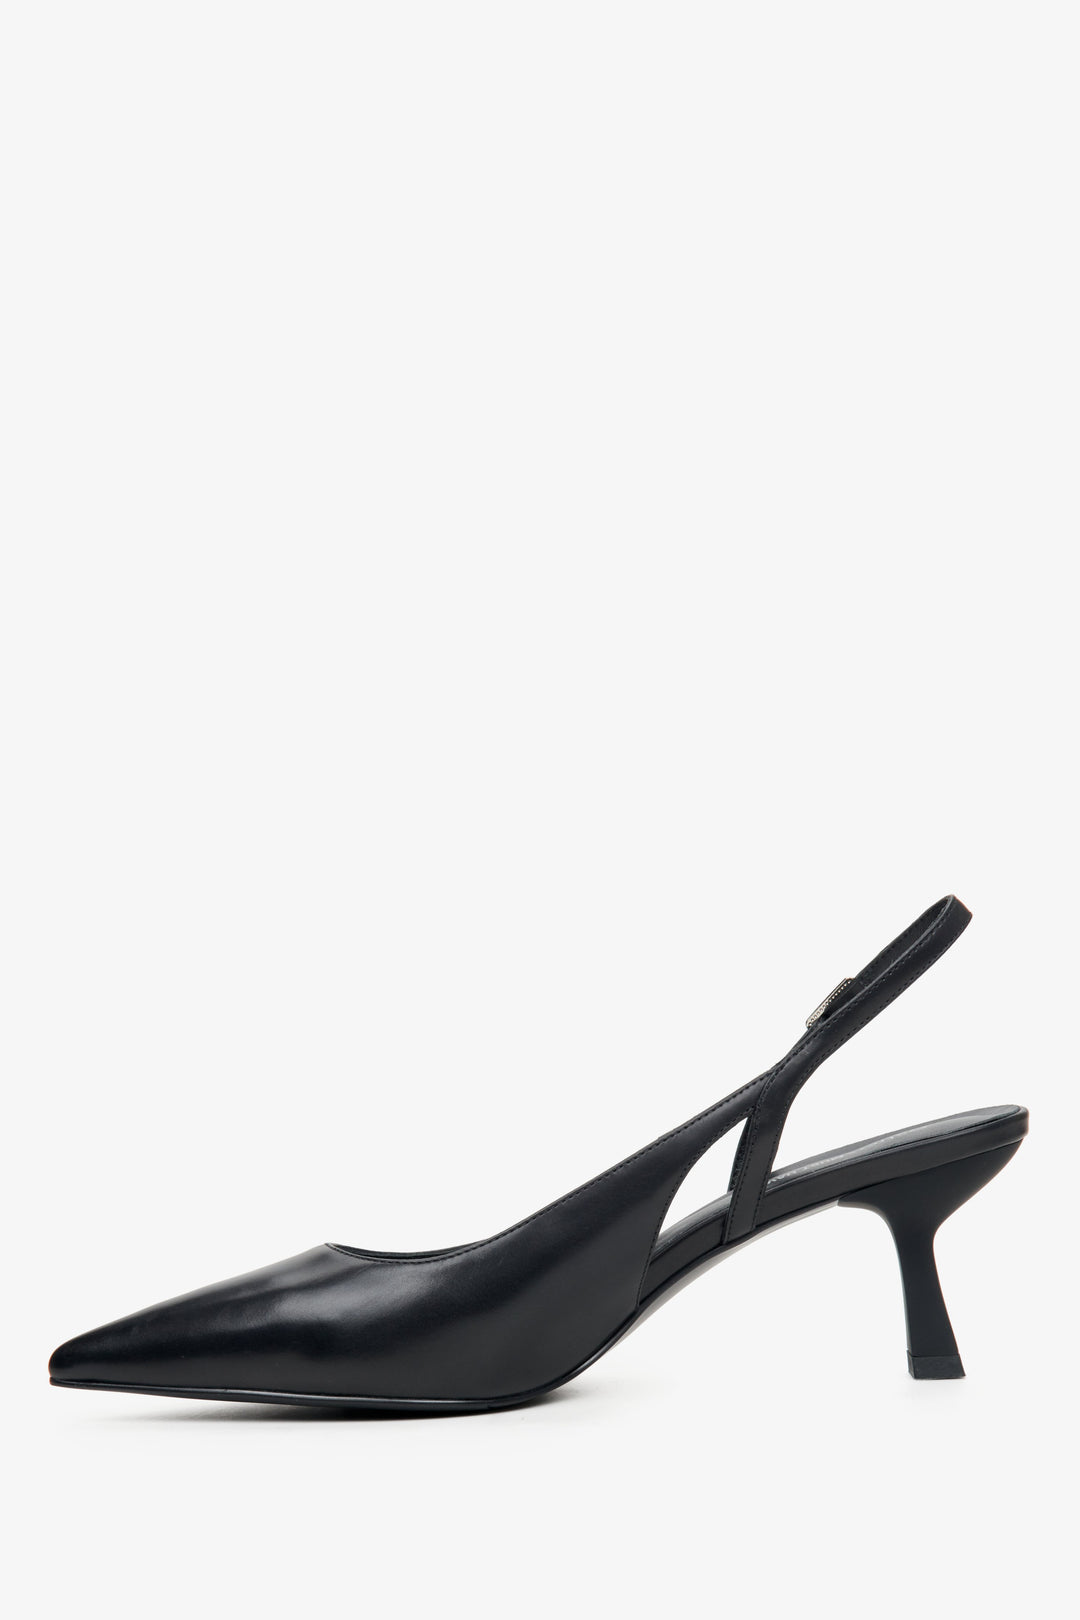 Women's black slingback shoes by Estro X MustHave - side profile of the shoe.